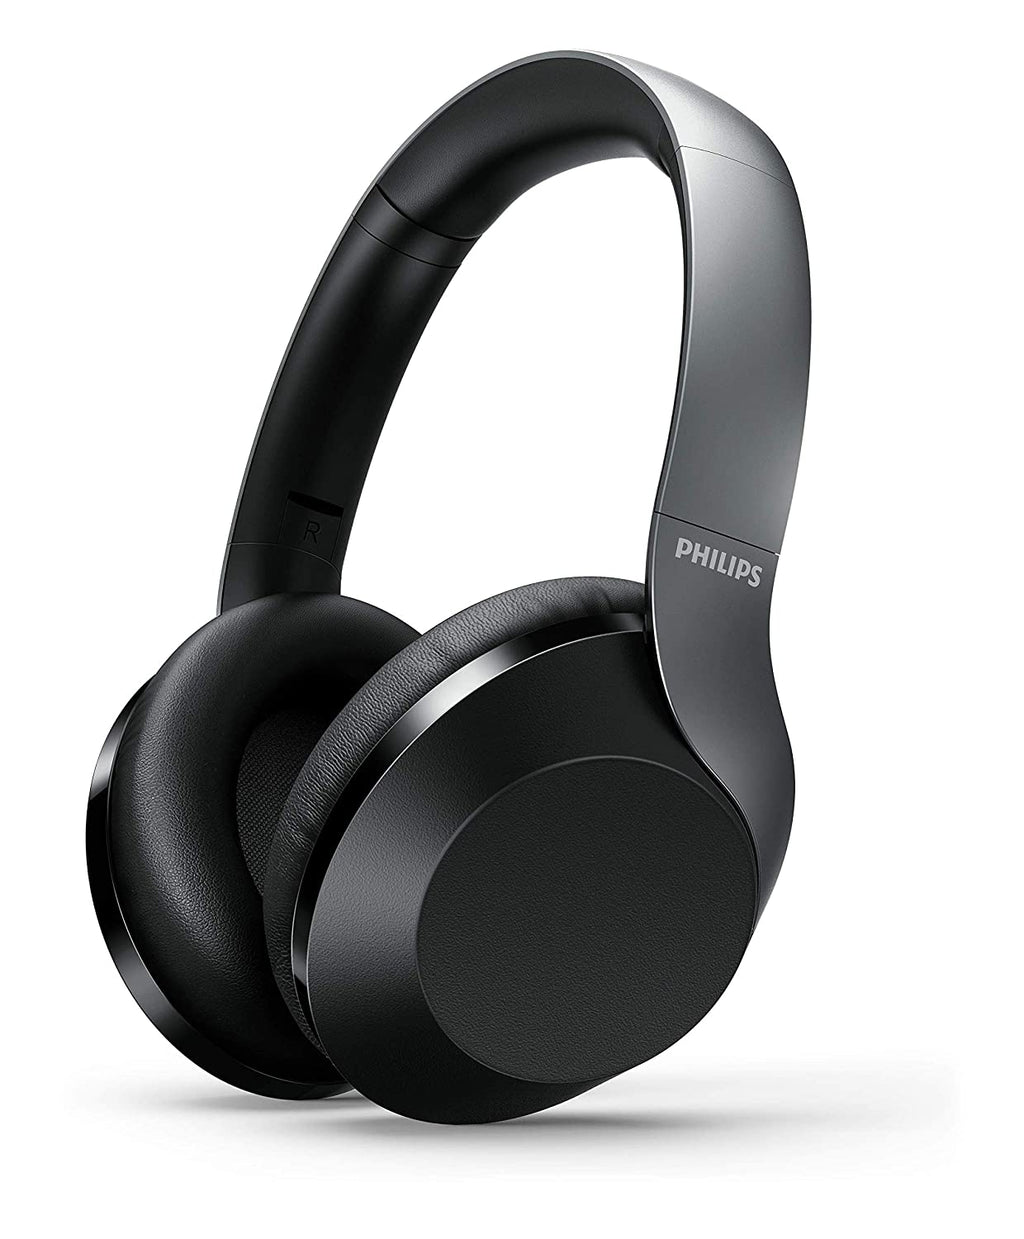 Philips Audio Performance TAPH805BK Bluetooth 5.0 Active Noise Cancelling Over-Ear Headphones with Google Assistant (Black)